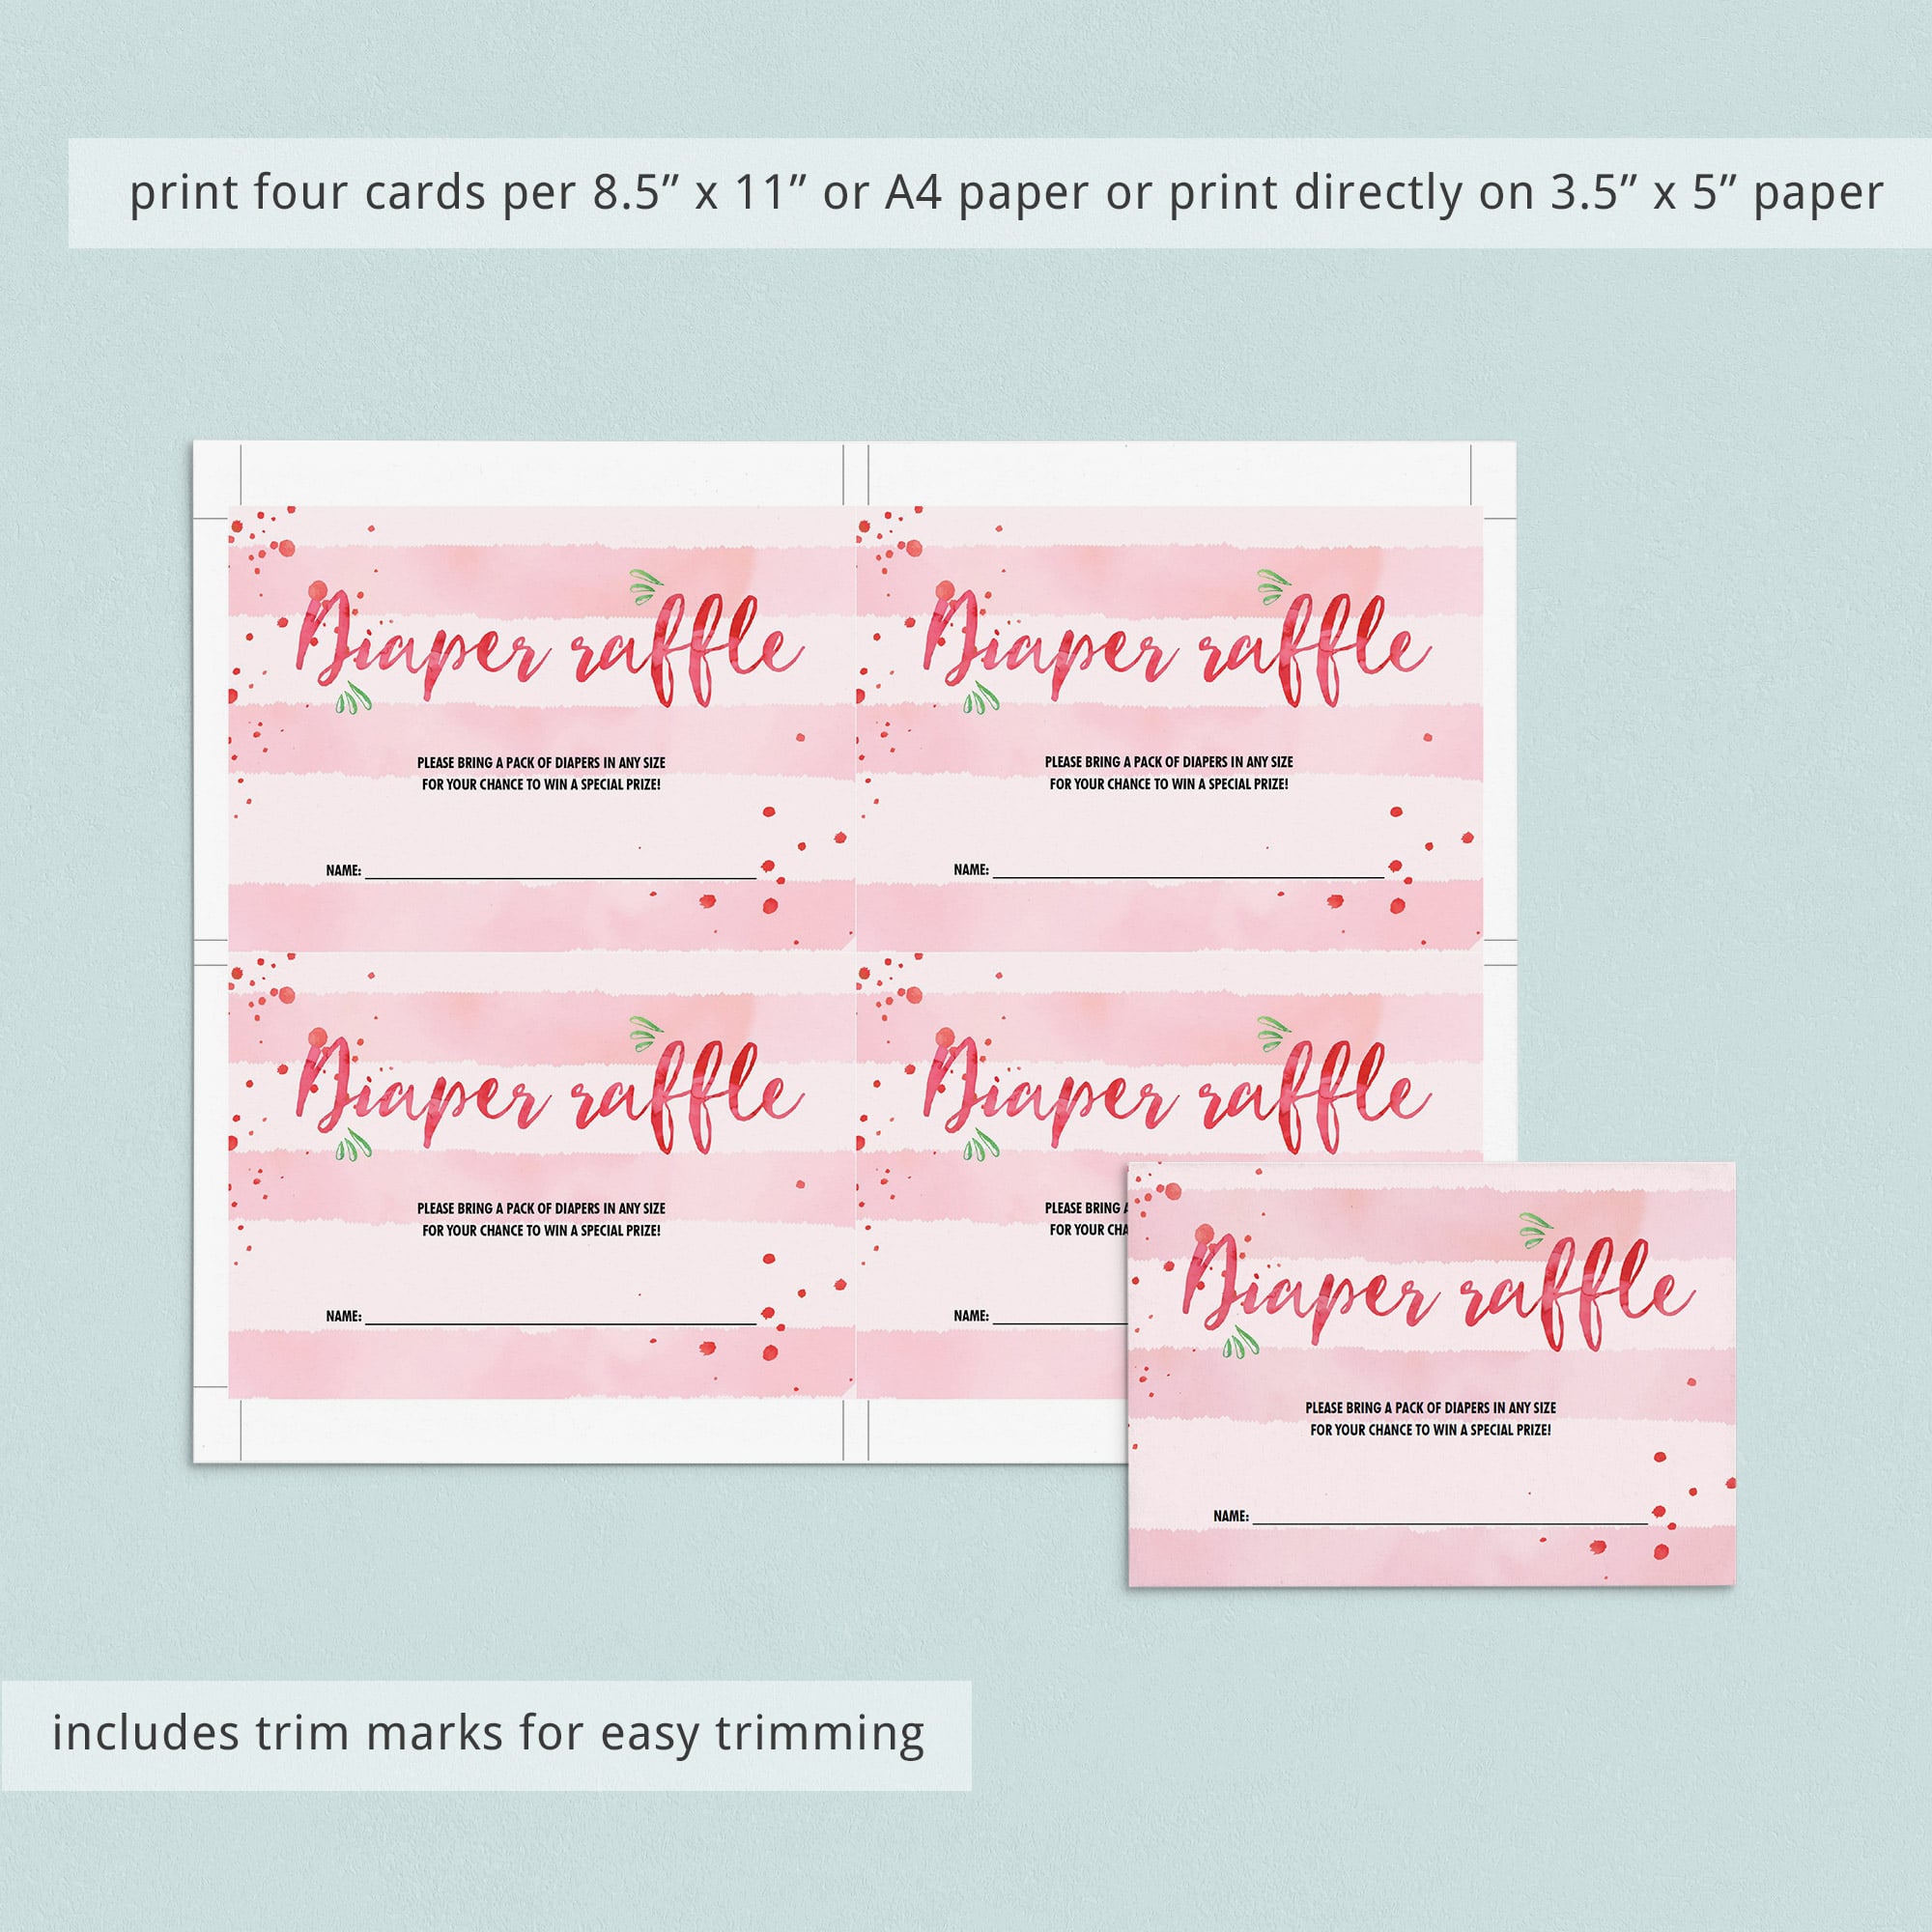 Printable diaper raffle game cards for girl baby shower by LittleSizzle